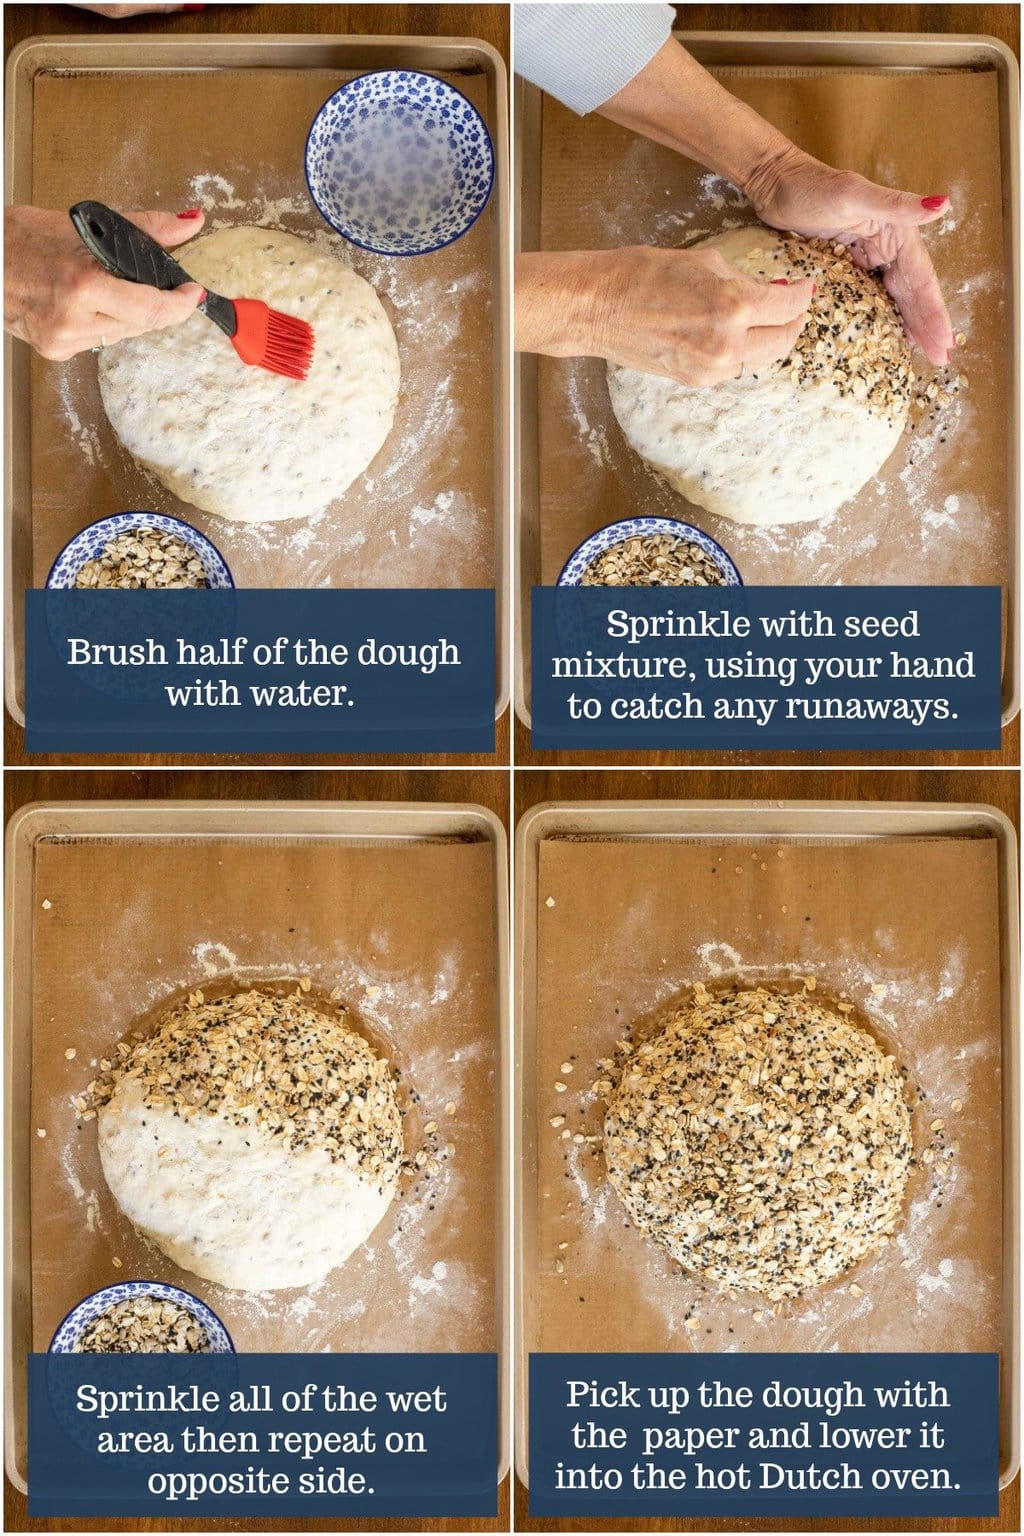 Vertical process photos demonstrating how to seed No-Knead Seeded Oatmeal Bread.